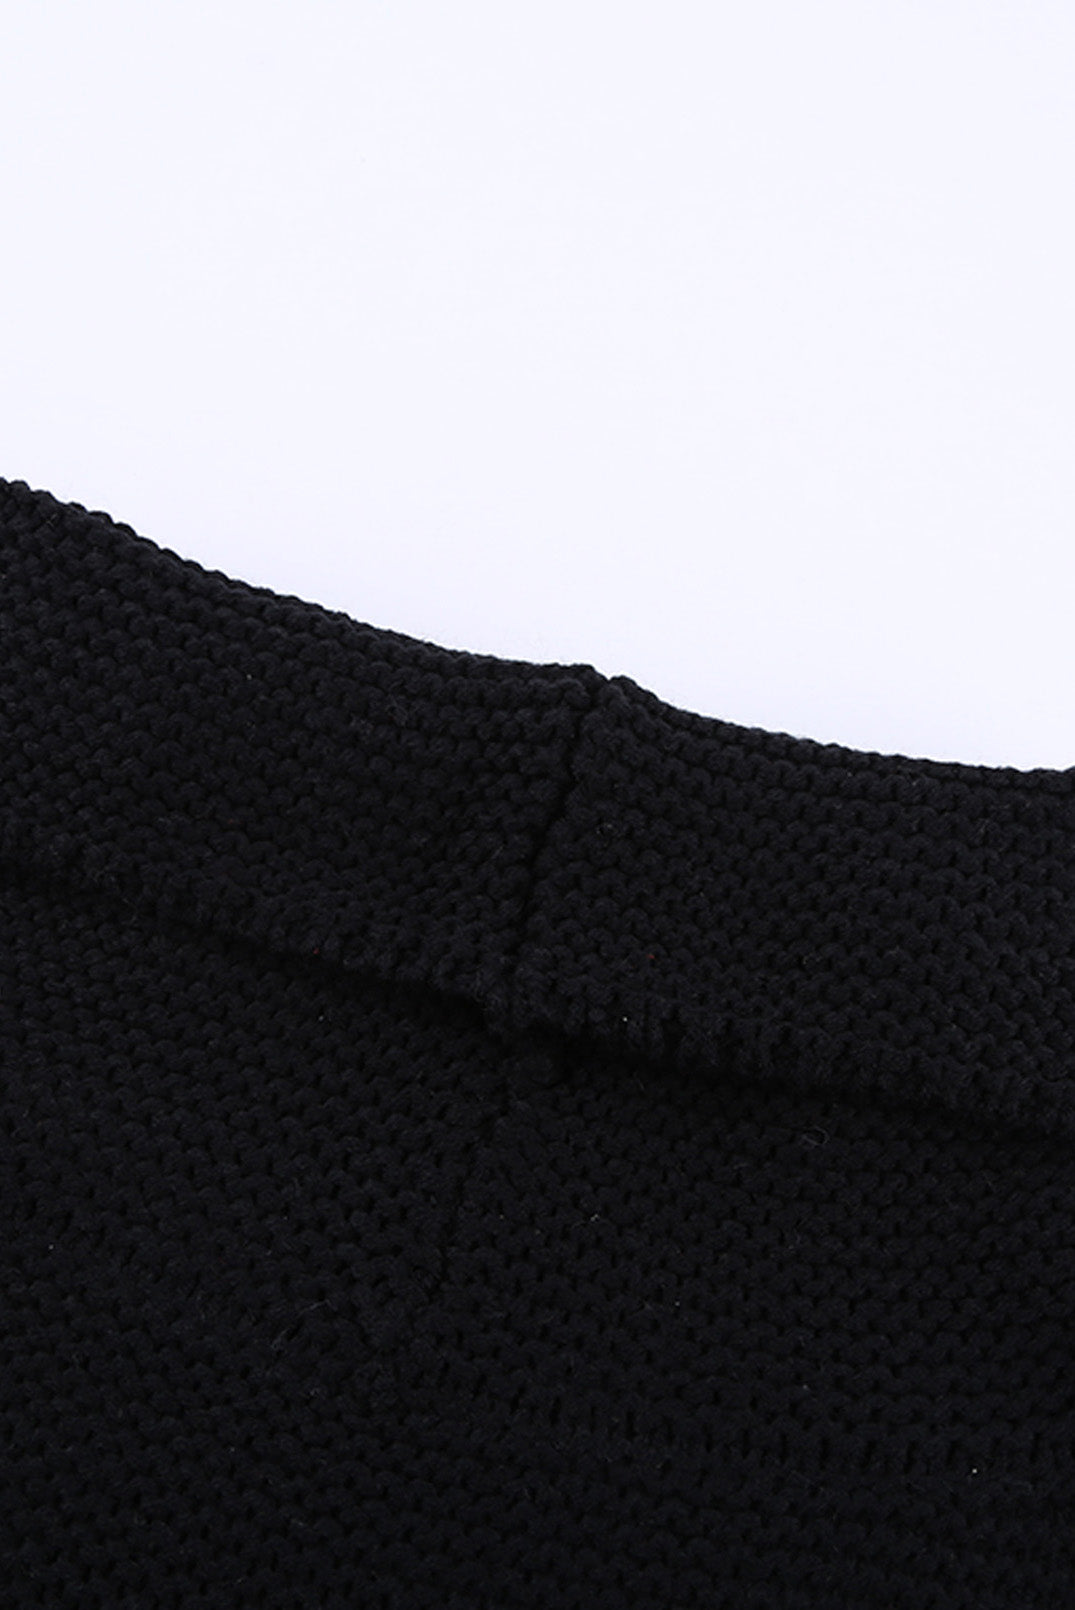 Black Turtleneck Splicing Chunky Knit Pullover Sweater